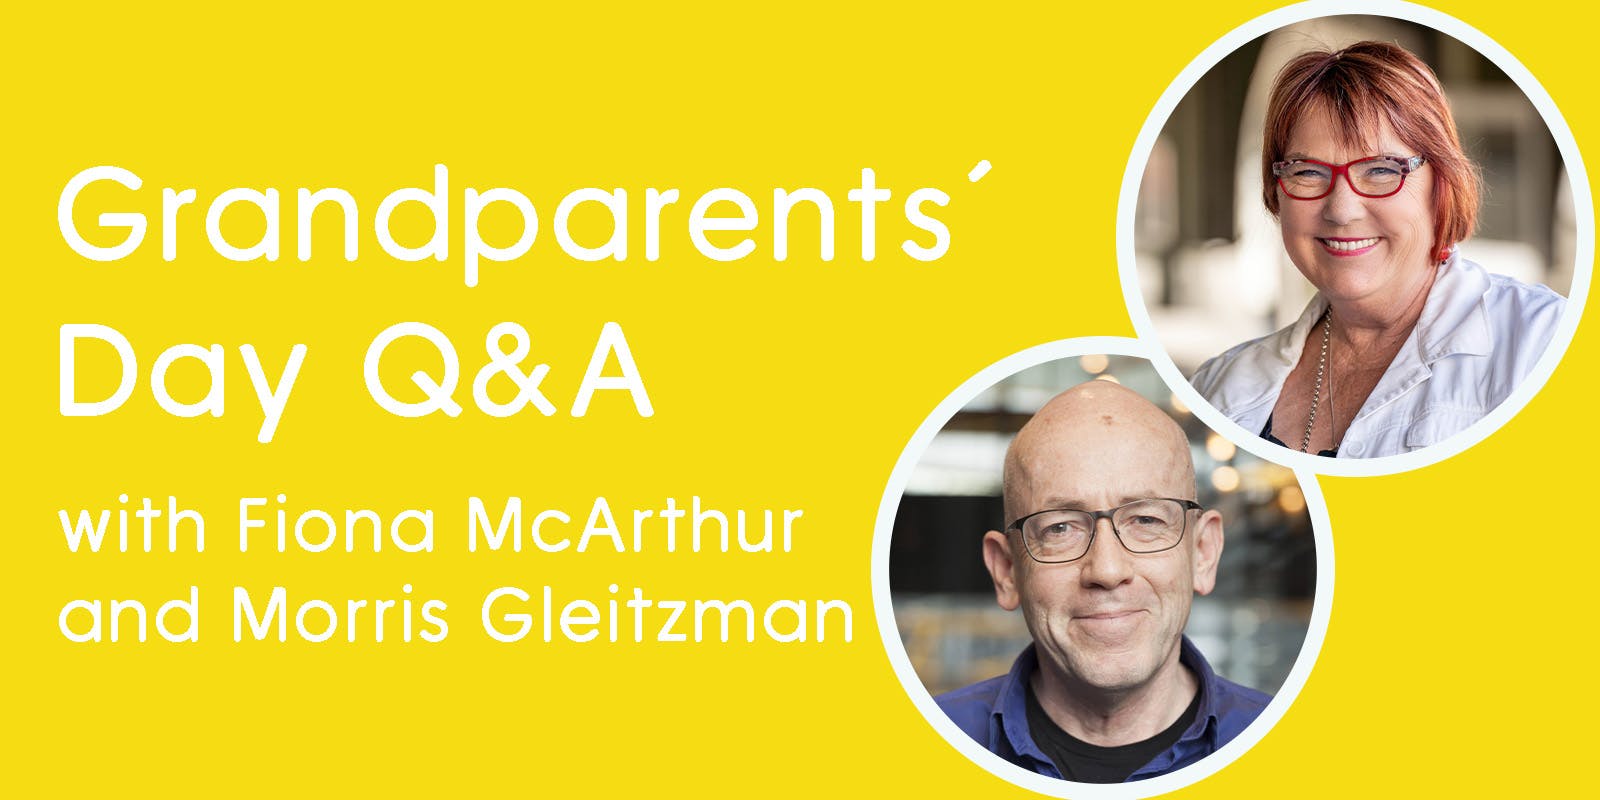 Two authors share their Grandparents’ Day plans